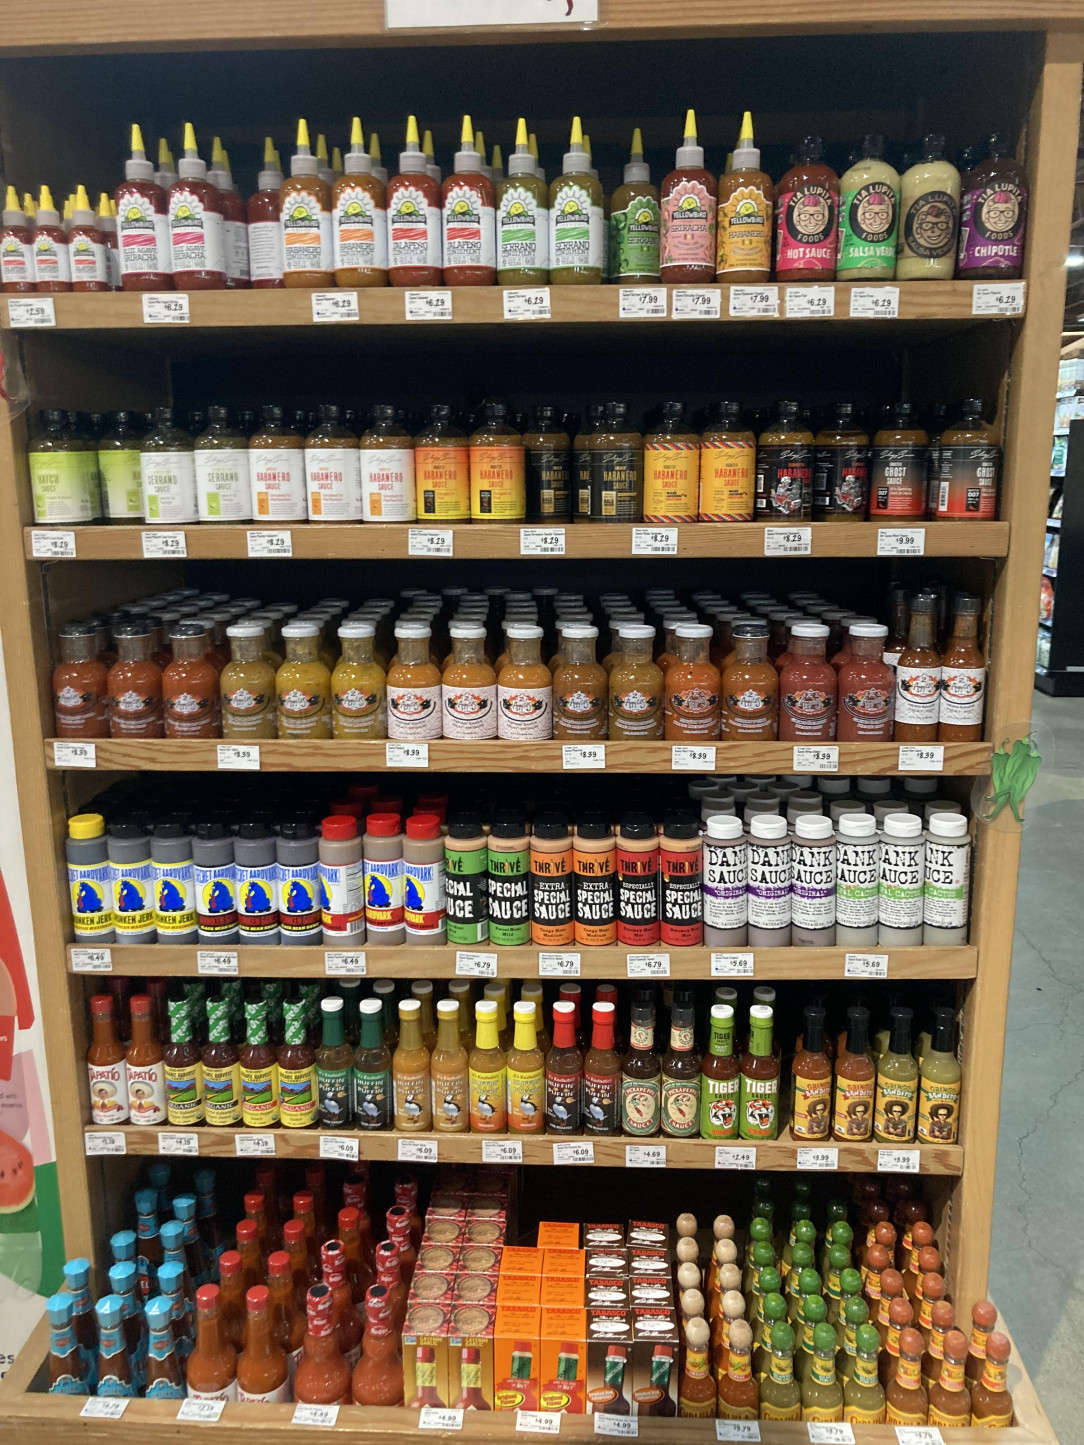 This hot sauce display at a grocery store